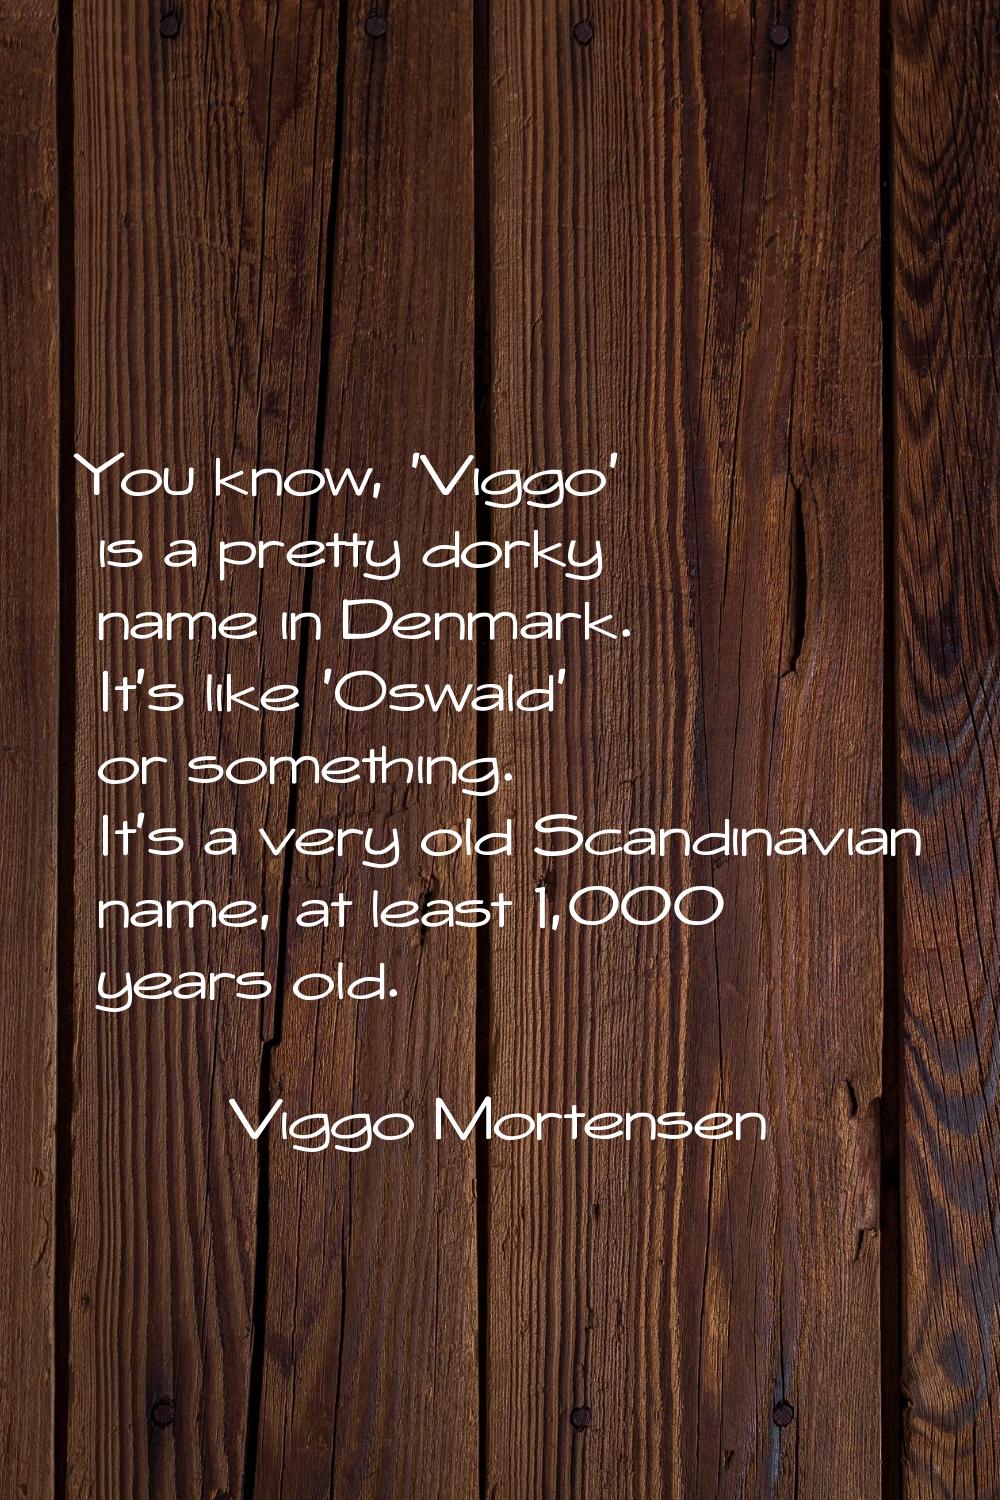 You know, 'Viggo' is a pretty dorky name in Denmark. It's like 'Oswald' or something. It's a very o